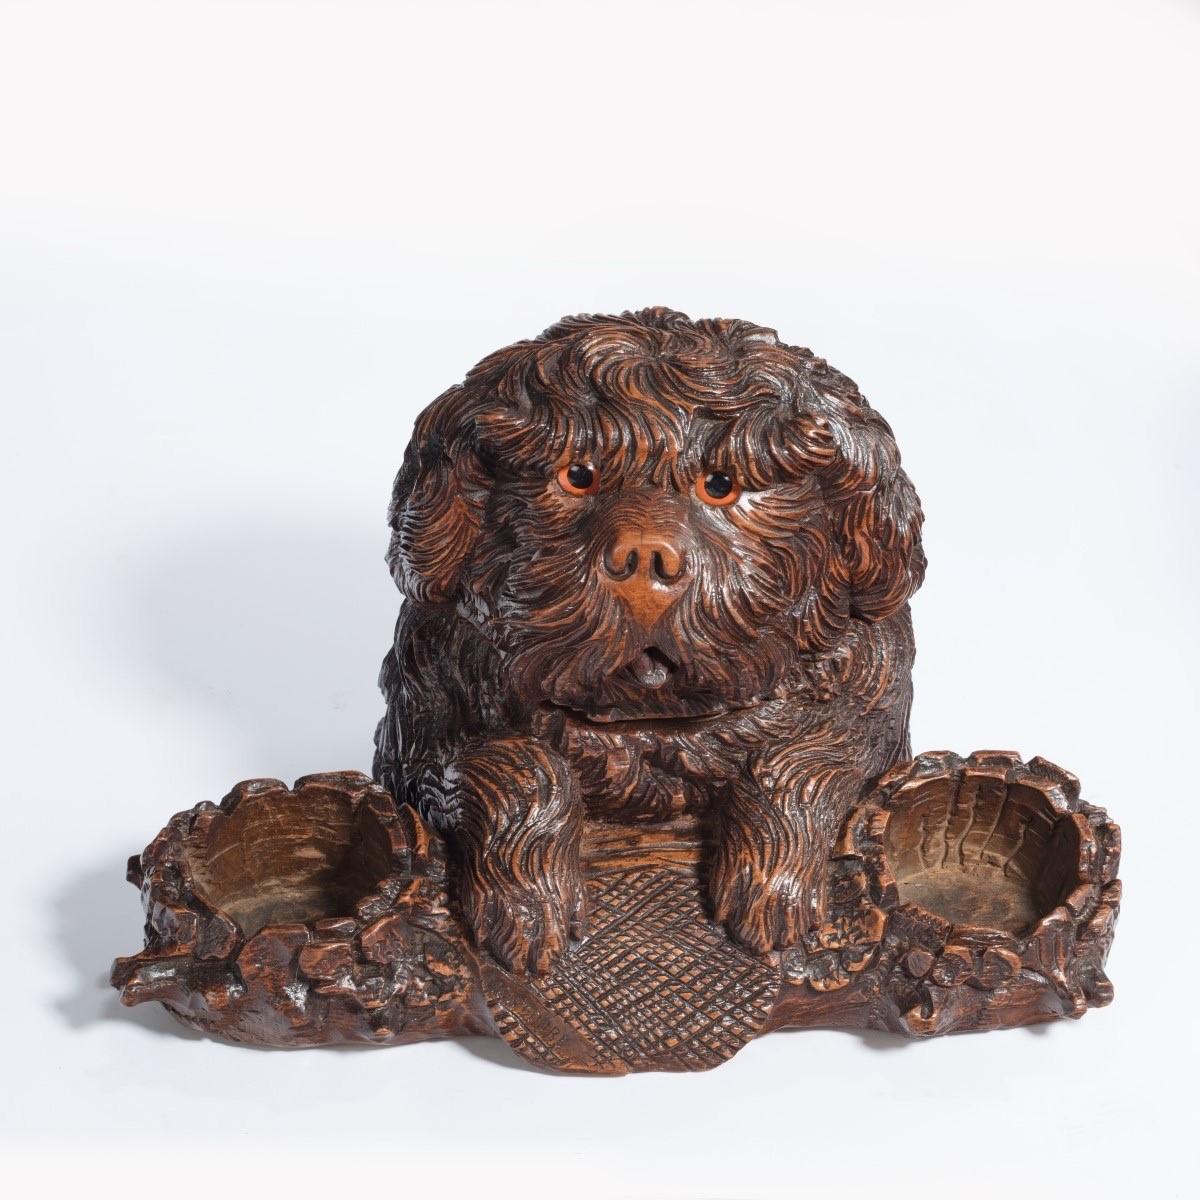 A ‘Black Forest’ walnut tobacco box in the form of a long-haired dog resting its forepaws on a log carved with a well at each end, the head, naturalistically carved with curly hair and inlaid glass eyes, is hinged and opens to reveal a hollowed out